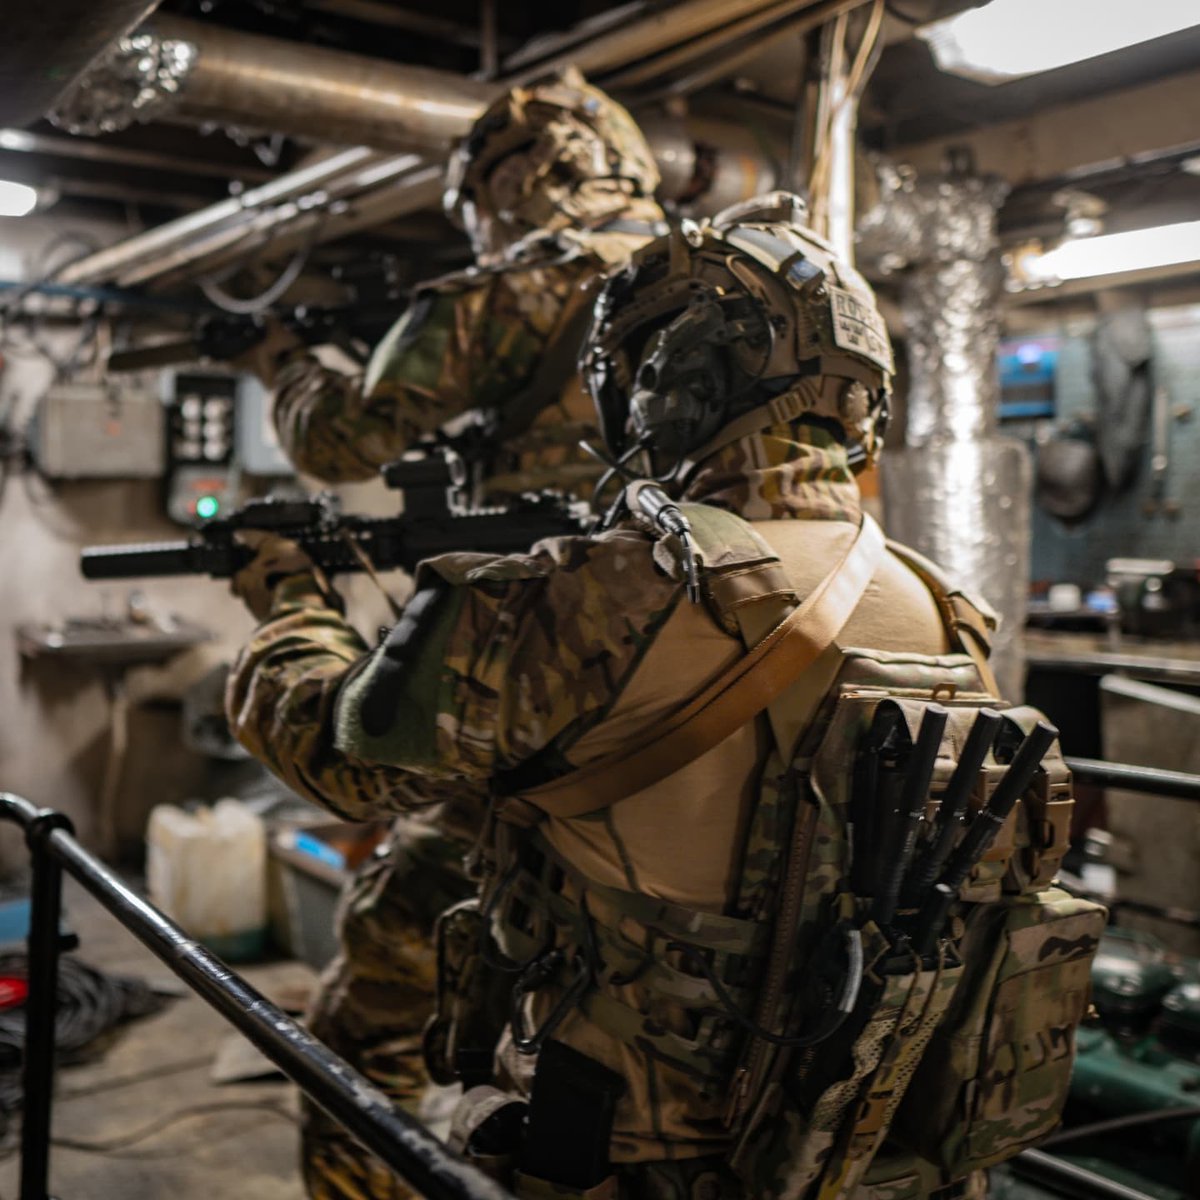 'Tactical-sweep' through the engine room..
-
ɢᴀᴍʙʟᴇ
-
#military #multicam #combat #vessel #maritime #vbss #ship #warfare #warrior #tacticalunit #tactical #tacticalswag #opscore #opscoreamp #comms #photographer #platecarrier #warriorassaultsystems 
 ( #📷 @gamble_swe )